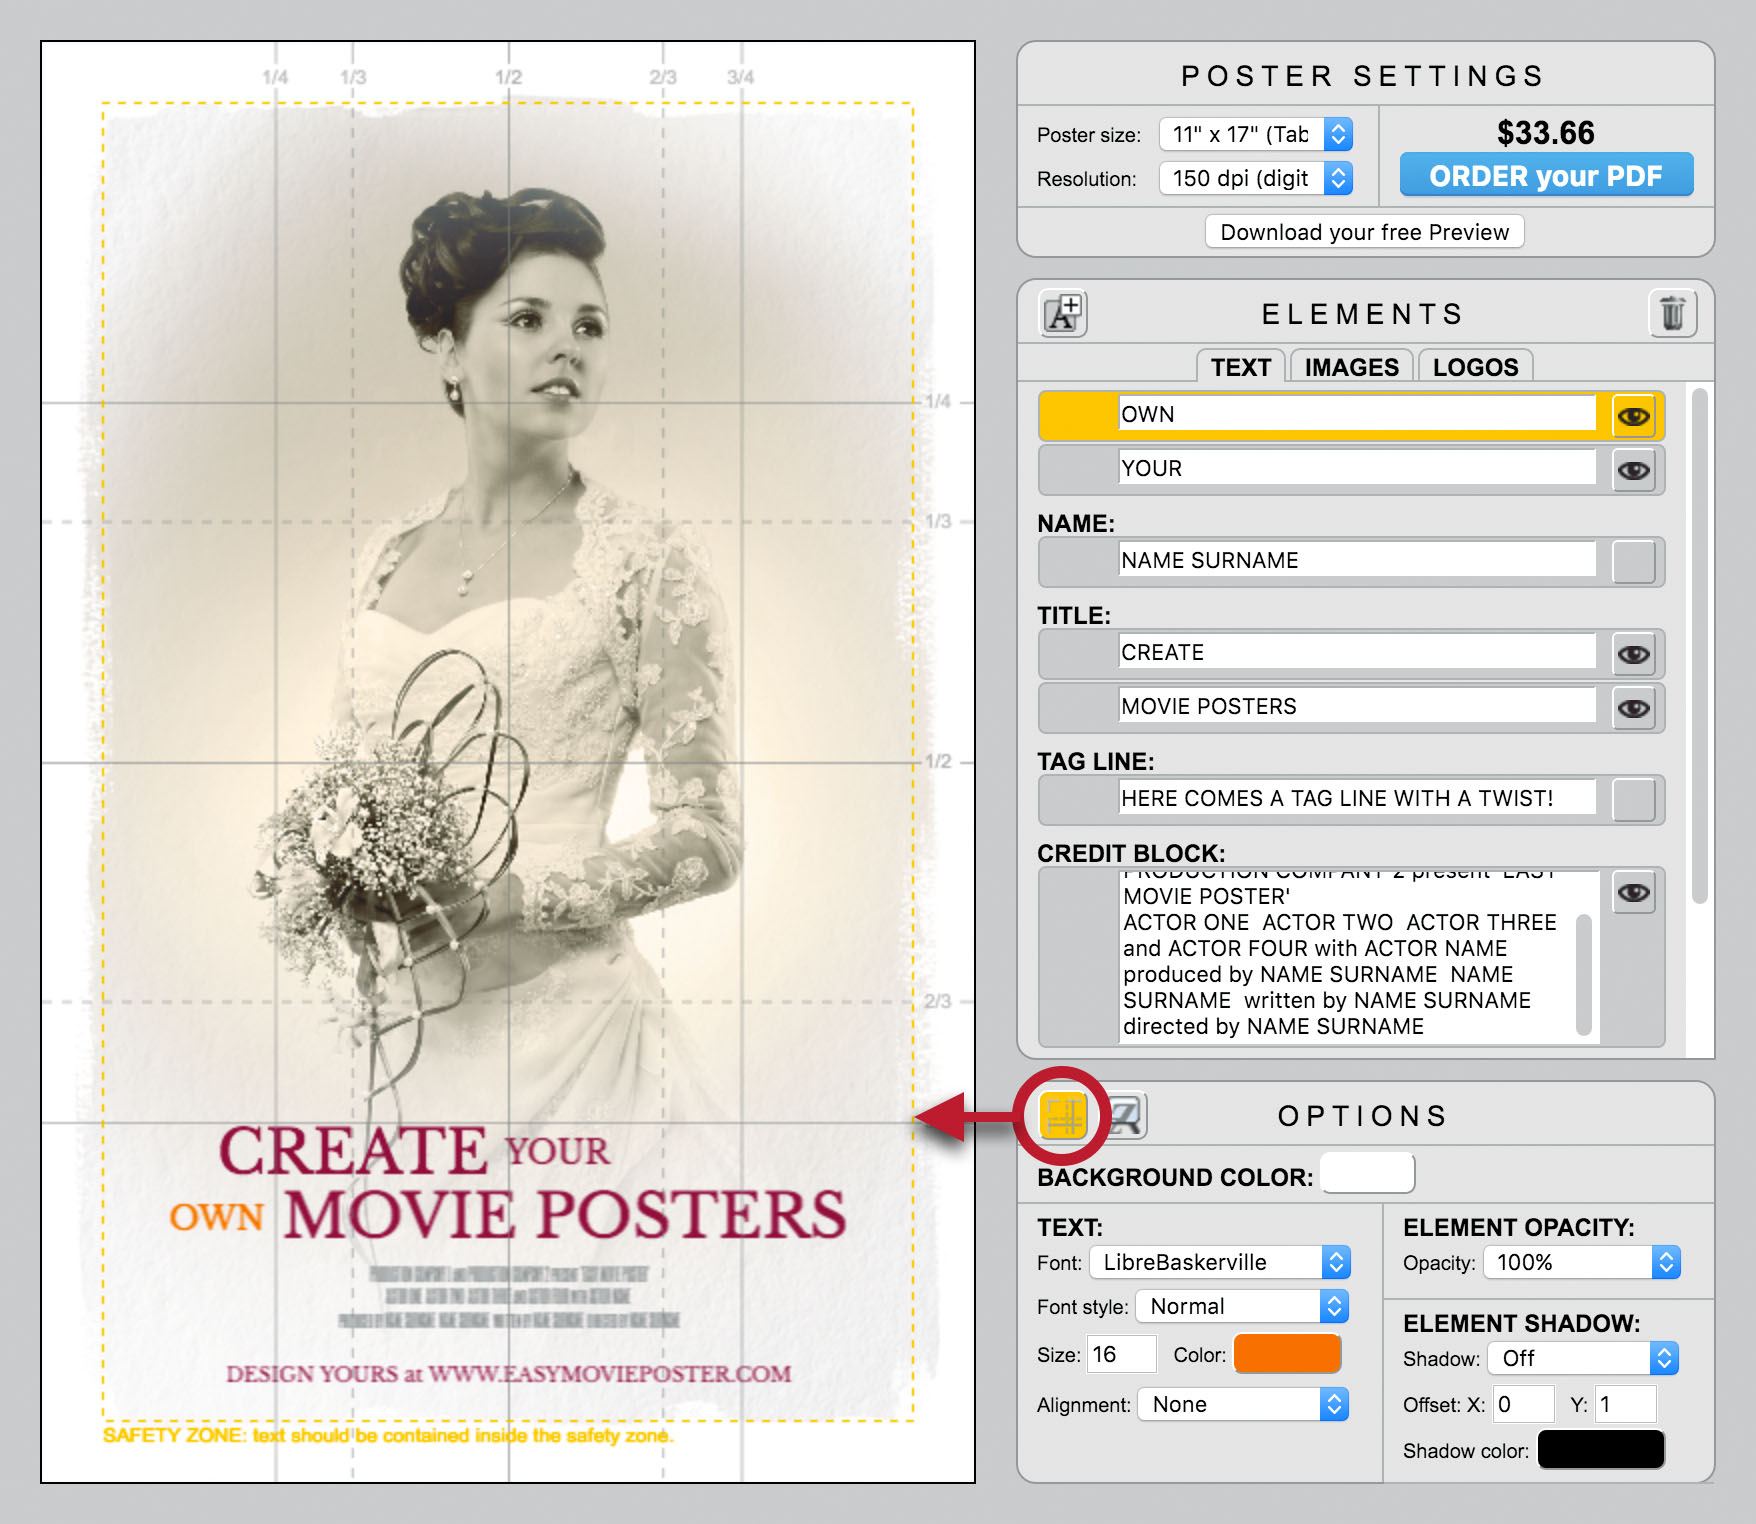 Easy Movie Poster - Look And Feel - The Zoopeeker's Wife - Case Study